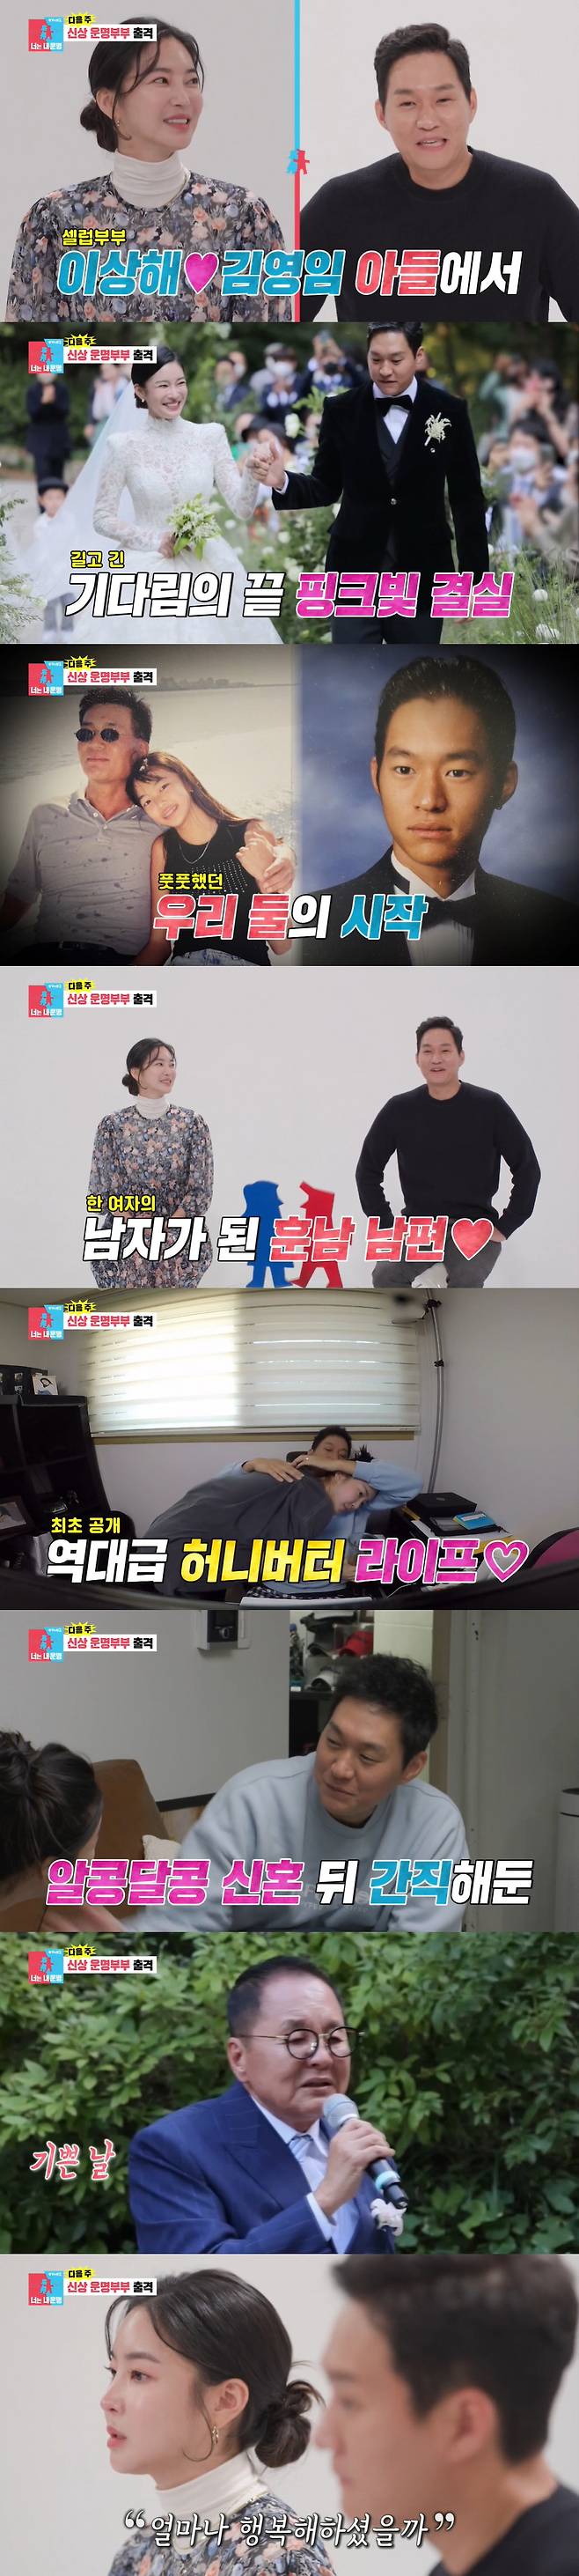 Same Bed, Different Dreams 22 Kim Yoon-ji unveiled Handsome boy Husband for the first timeSBS Same Bed, Different Dreams 2 Season 2 - You Are My Destiny broadcast on the 1st, the newly joined Lee Yoonji and Choi Woo Sung were predicted.Kim Yoon-ji said, Our dad and my father were close like brothers, and Husband Choi Sung Eun It was very pretty when I first saw it.There was a mutual likeability - my First Love started the moment it was confirmed, Kim Yoon-ji said.The two men who came to a pink fruit at the end of a long and long wait.Choi Sung Eun It is Choi Woo-sung who came to visit Kim Yoon-jis Husband in Kim Young-ims son.Then, the daily life of the newlyweds was revealed, and the appearance of the marriage ceremony was also drawn.I decided not to cry, but there are so many good memories, said Lee Sang-hae, who was tearful as she recalled Kim Yoon-jis father, who also said, I missed it rather than sad.I think I was happy, he said, remembering his father and shed tears.Lee Hyun also prepared for a trip for Husband Hong Sung-ki, who celebrated his birthday.Lee Hyun took the steering wheel directly, and Hong Sung-ki suspected, We are memories right?Lee Hyun said, It is a place where I want to be scared and I will do a big job if I do not marriage with this woman.The first destination was Jarasum, who was surprised to say, Youre riding a couple bike? and departed with concern.Lee Hyun said, Lets go to the scenery slowly, but Husband laughed at the bike dream, saying, Do not look at it and step on it.Hong Sung-ki, who saw the suspicious pension afterwards, said, It is that pension. I saw a ghost here.As soon as I entered, I recalled memories 10 years ago, and Lee Hyun recalled, I only remember coming here in Taxi in Sinsa-dong, Gangnam.At that time, Husband said, Did you come to me because you suspected me? Lee Hyun said, Three men went to the jazz festival.I did not see jazz normally, but suddenly I went to a jazz festival, and the pension photo was a princess, so I was steamed. Im playing, too, and I said, Get home quickly. I did not usually do it. I just hung up.I rode Taxi from Sinsa-dong, Gangnam to Gapyeong. Lee Hyun said, The driver was afraid of a suspicious woman with an empty phone for an hour, a road that was tough.I said, I dont know, he recalled, I got off Taxi and found it with a vibration sound. Lee Hyun said, The door was open.I went up the stairs according to the vibration, and Hong Sung-ki said, I was sleeping and I was tickling.As soon as I saw you, I grabbed the back and pulled back. After filling the boat with a pork belly party, Lee Hyun made a sweet gona for Hong Sung-ki, who was in love with Squid Game, and proceeded with Mugunghwa Game and raising.Since then, Jean Lee Hyun has released a gift prepared by all the Game, and Hong Sung Gi smiled at the Golf pouch and the resonance gift he wanted to have.Diet self-discipline training day for Moon Jea-wan in Diet was also drawn.On this day, Moon Jea-wan found Han River on a rainy day, and Lee Ji-hye laughed when he caught the same boat of Moon Jea-wan and Lee Ji-hye, who was 8 months pregnant, saying, I lost a lot of fat two inches but I was stuck in Diet.Lee Ji-hye said, There will be a great reward if you ride an hour, and burned Moon Jea-wans motivation.Moon Jea-wan then started running cool on his bike, when Lee Ji-hye met Kim Won-hee, who was waiting at the Zamdubong dock.Kim Won-hee said, I gave Husband a mission, and said, Dont be atrocious, I had a depth in my face.Kim Won-hees Husband does Exercise too much, he says: Its not too fat, if you put it a little bit, its Exercise and youre all out, theres Six Pack on the belly.I am disappointed, he said, and Lee Ji-hye laughed at him saying, Is it proud? Moon Jea-wan, who arrived five minutes later than the time, said, I am a fan, and Kim Won-hee said, I am good because I am out of weight.Kim Won-hee said, I said I would not eat it if it was late, but I said, What do you mean? I have to eat rice.I will tell you how to eat well, he said.Later, starting the pork belly mukbang, Moon Jea-wan started to eat it, when Kim Won-hee said, You have to walk.We have to walk with more retaliation. Moon Jea-wan also followed, but laughed with a somewhat creaky movement.At that time, Moon Jea-wan said, Can I have more meat? Can I eat only once if I am a ramen, Han River is ramen.In the end, Moon Jea-wans gentle eyes, Kim Won-hee said, Let me eat if it is only today, and Moon Jea-wan danced his shoulder.